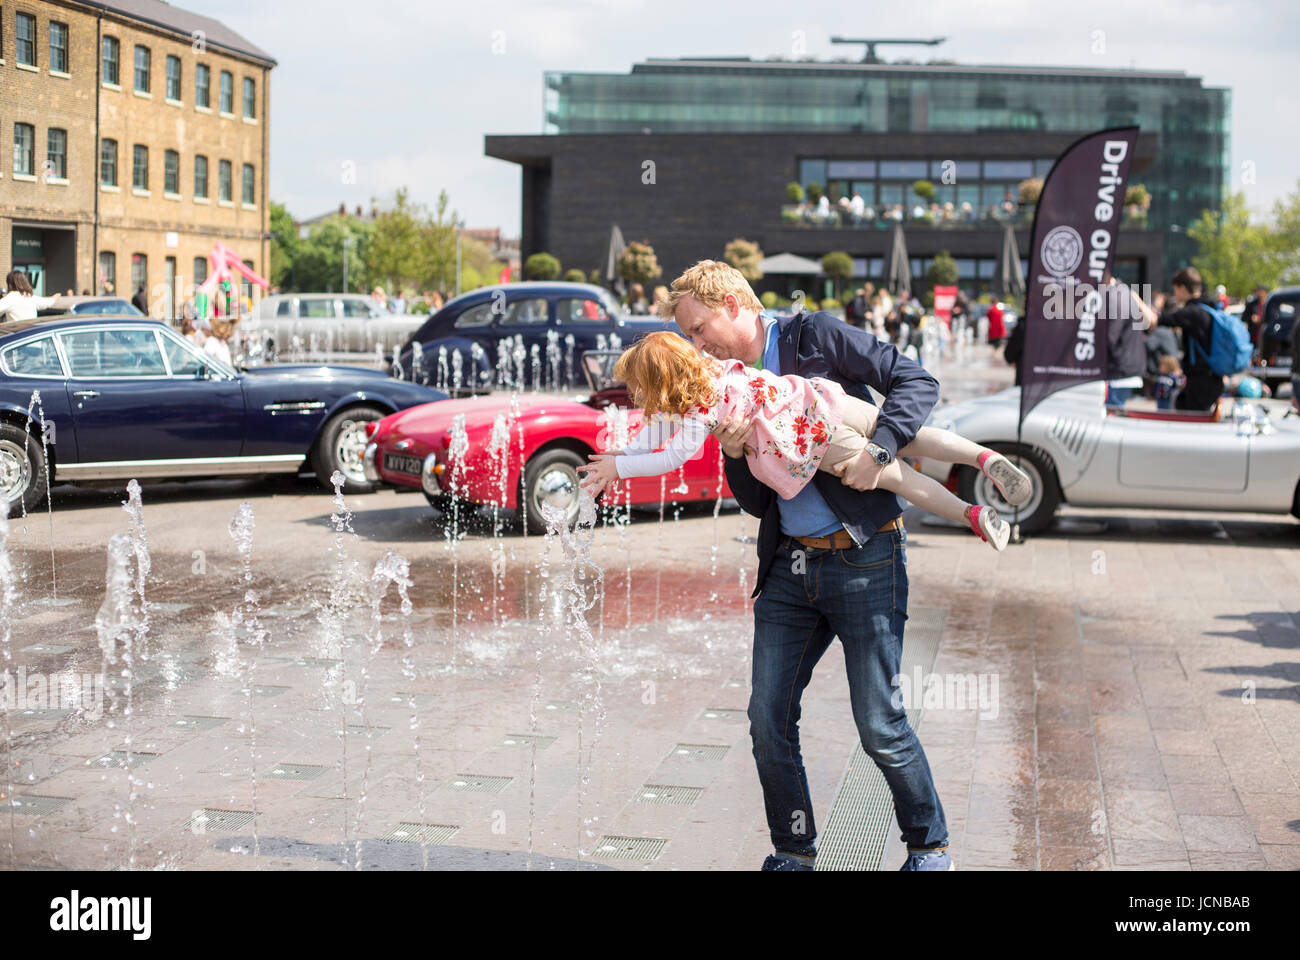 Dad plays with daughter in fountain in London. Stock Photo